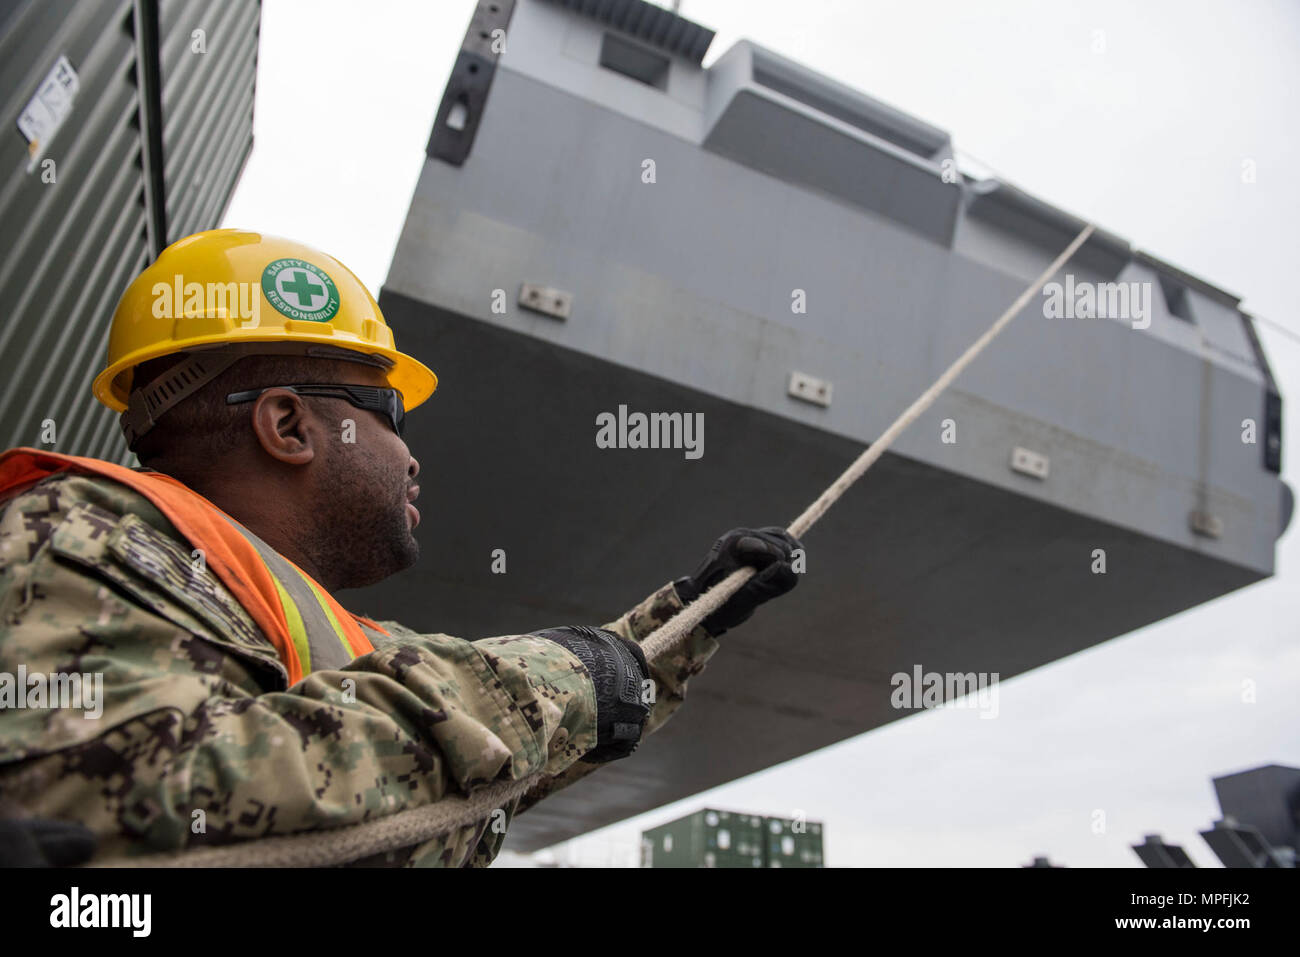 POHANG, Republic of Korea (Apr. 9, 2017) Equipment Operator 2nd Class Jerome Daniels from Navy Cargo Handling Battalion One secures lines to an intermediate module for unloading from Navy Maritime Prepositioning Force Ship USNS Pililaau (T-AK 304) using Improved Navy Lighterage System (INLS) while anchored off the coast of Pohang, Republic of Korea during Combined Joint Logistics Over the Shore (CJLOTS) April 9. CJLOTS is a biennial exercise conducted by military and civilian personnel from the United States and the Republic of Korea, training to deliver and redeploy military cargo as a part o Stock Photo